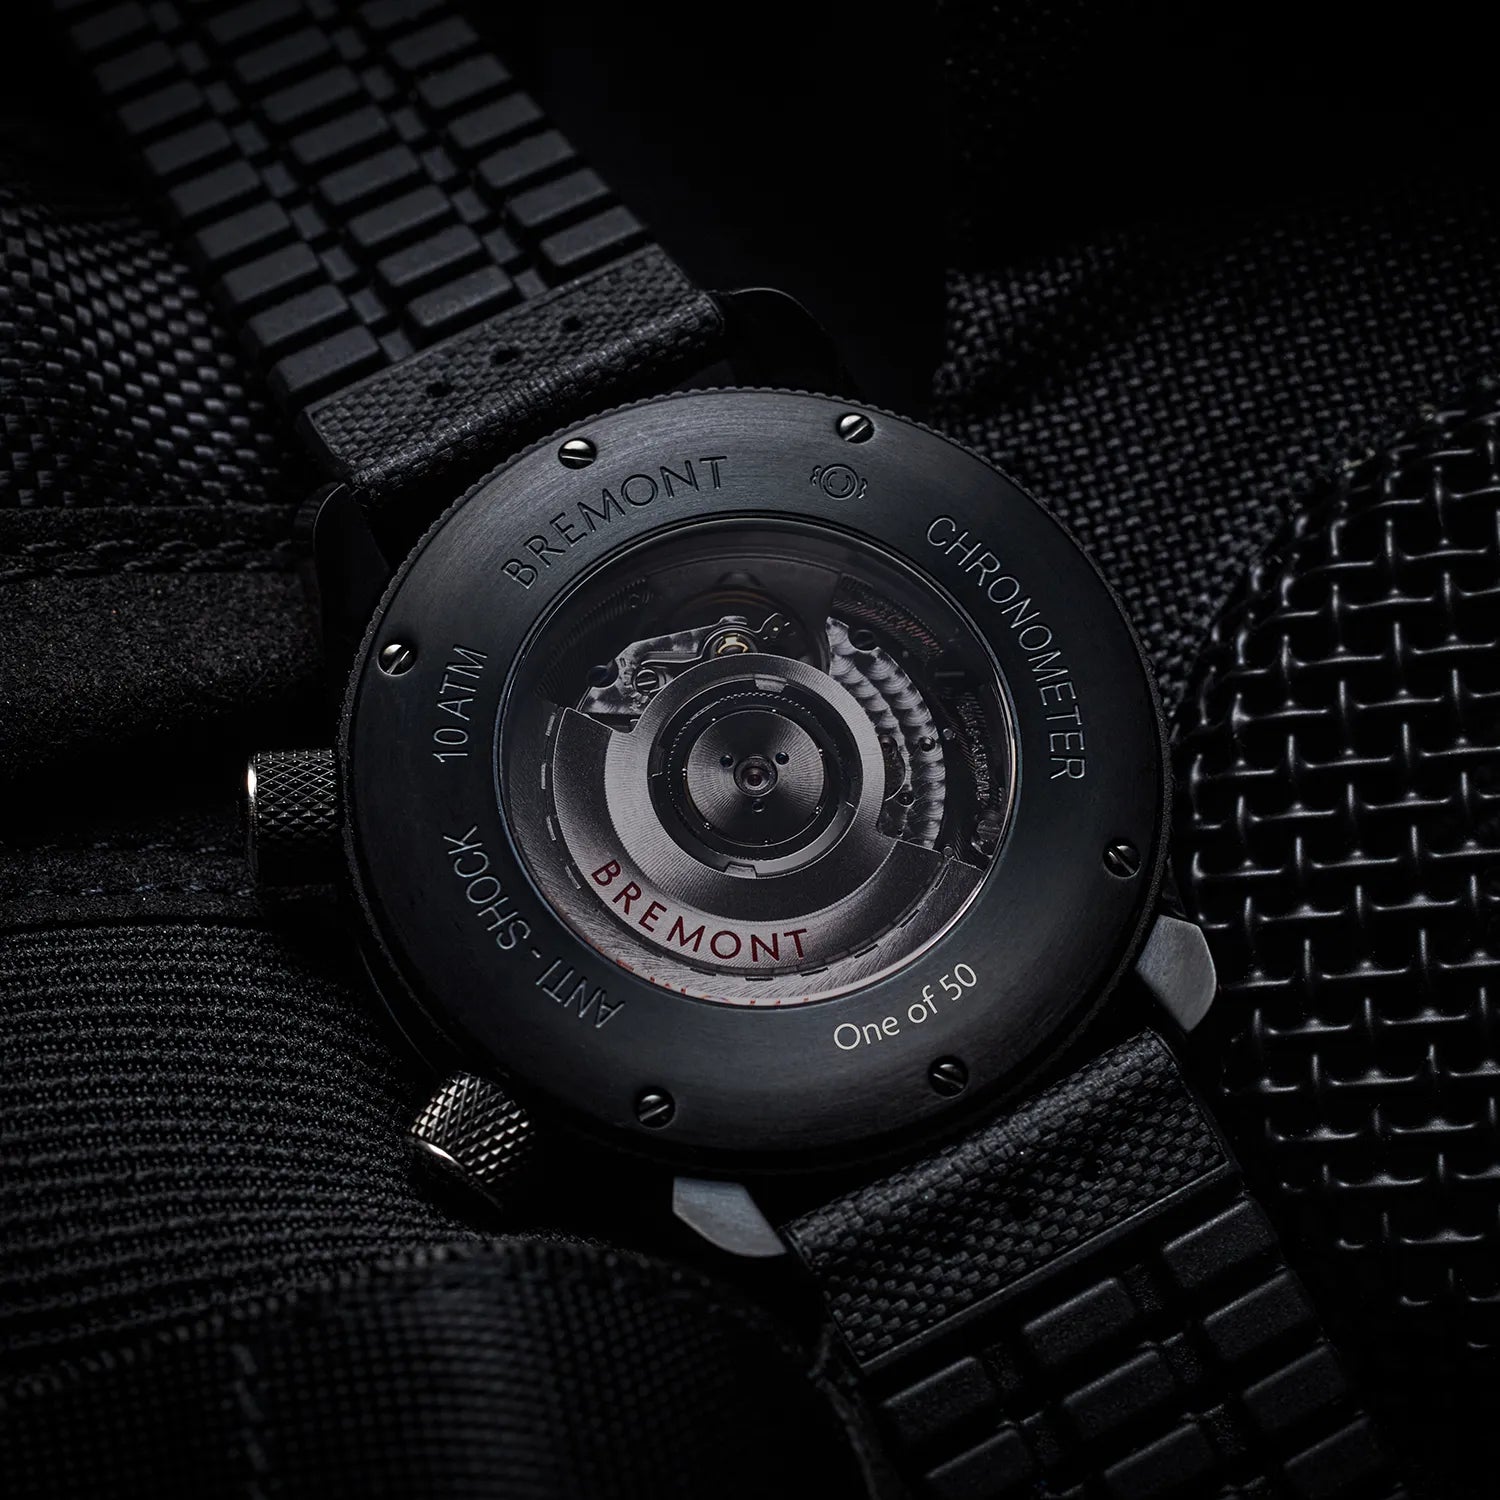 Stealth automatic watch — MK